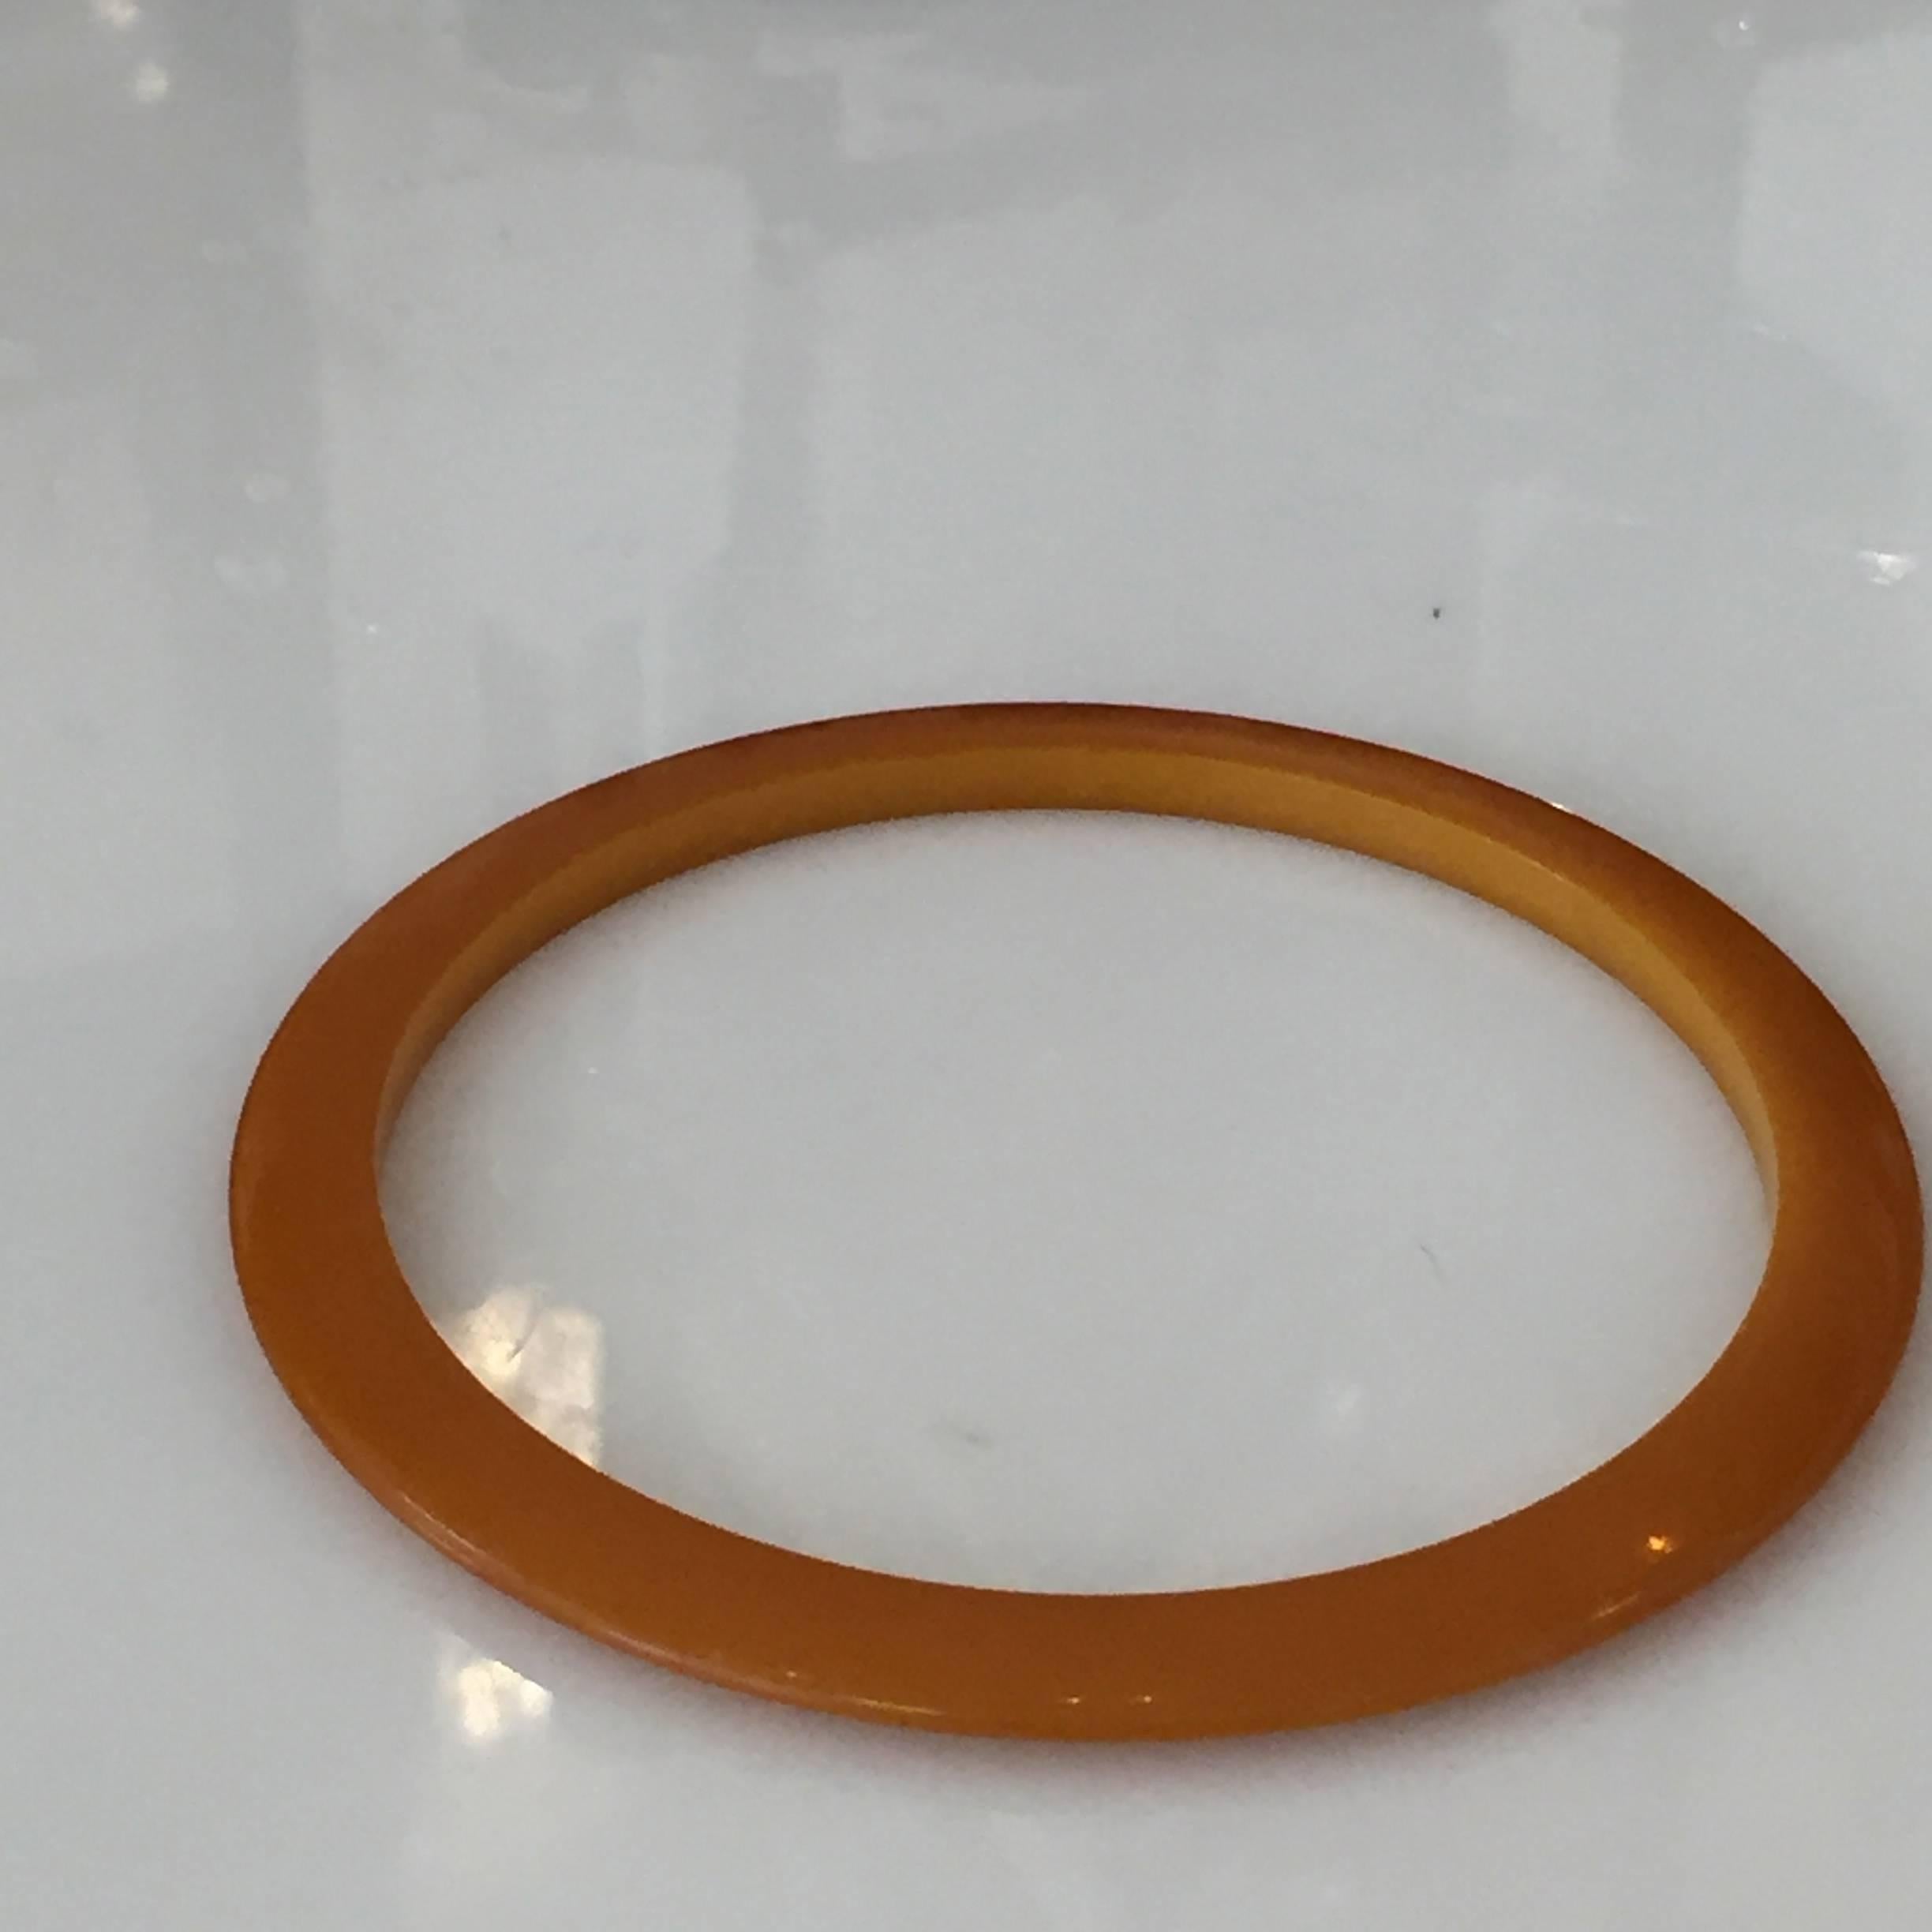 Authentic Art Deco Butterscotch Amber Bakelite Bangle Bracelet In Excellent Condition For Sale In Van Nuys, CA